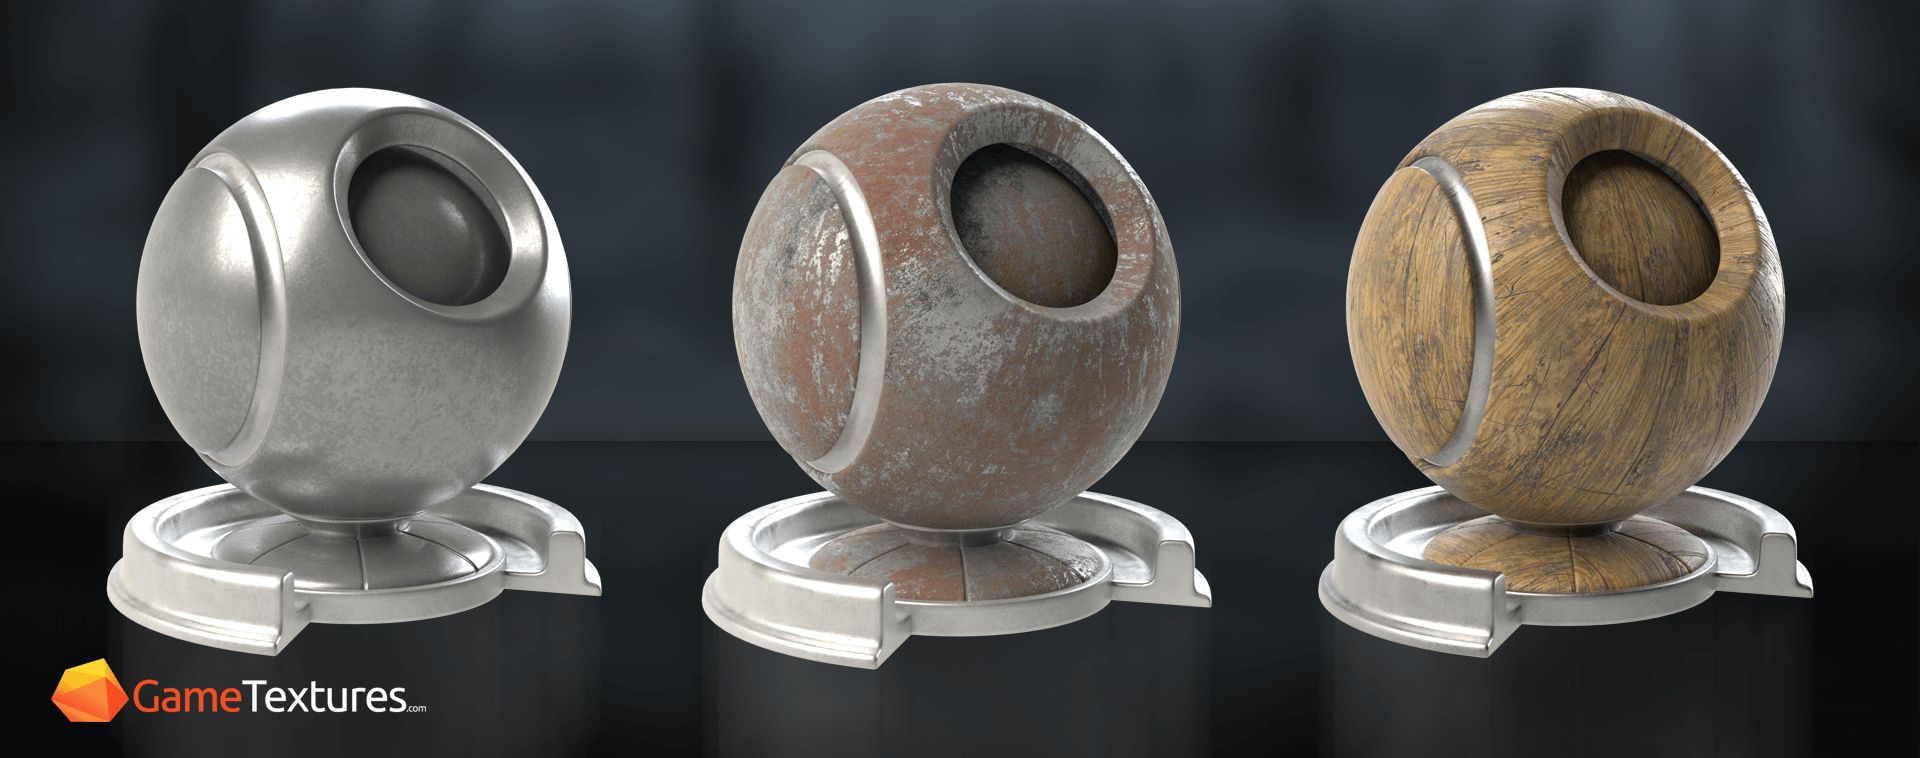 Substance painter free trial